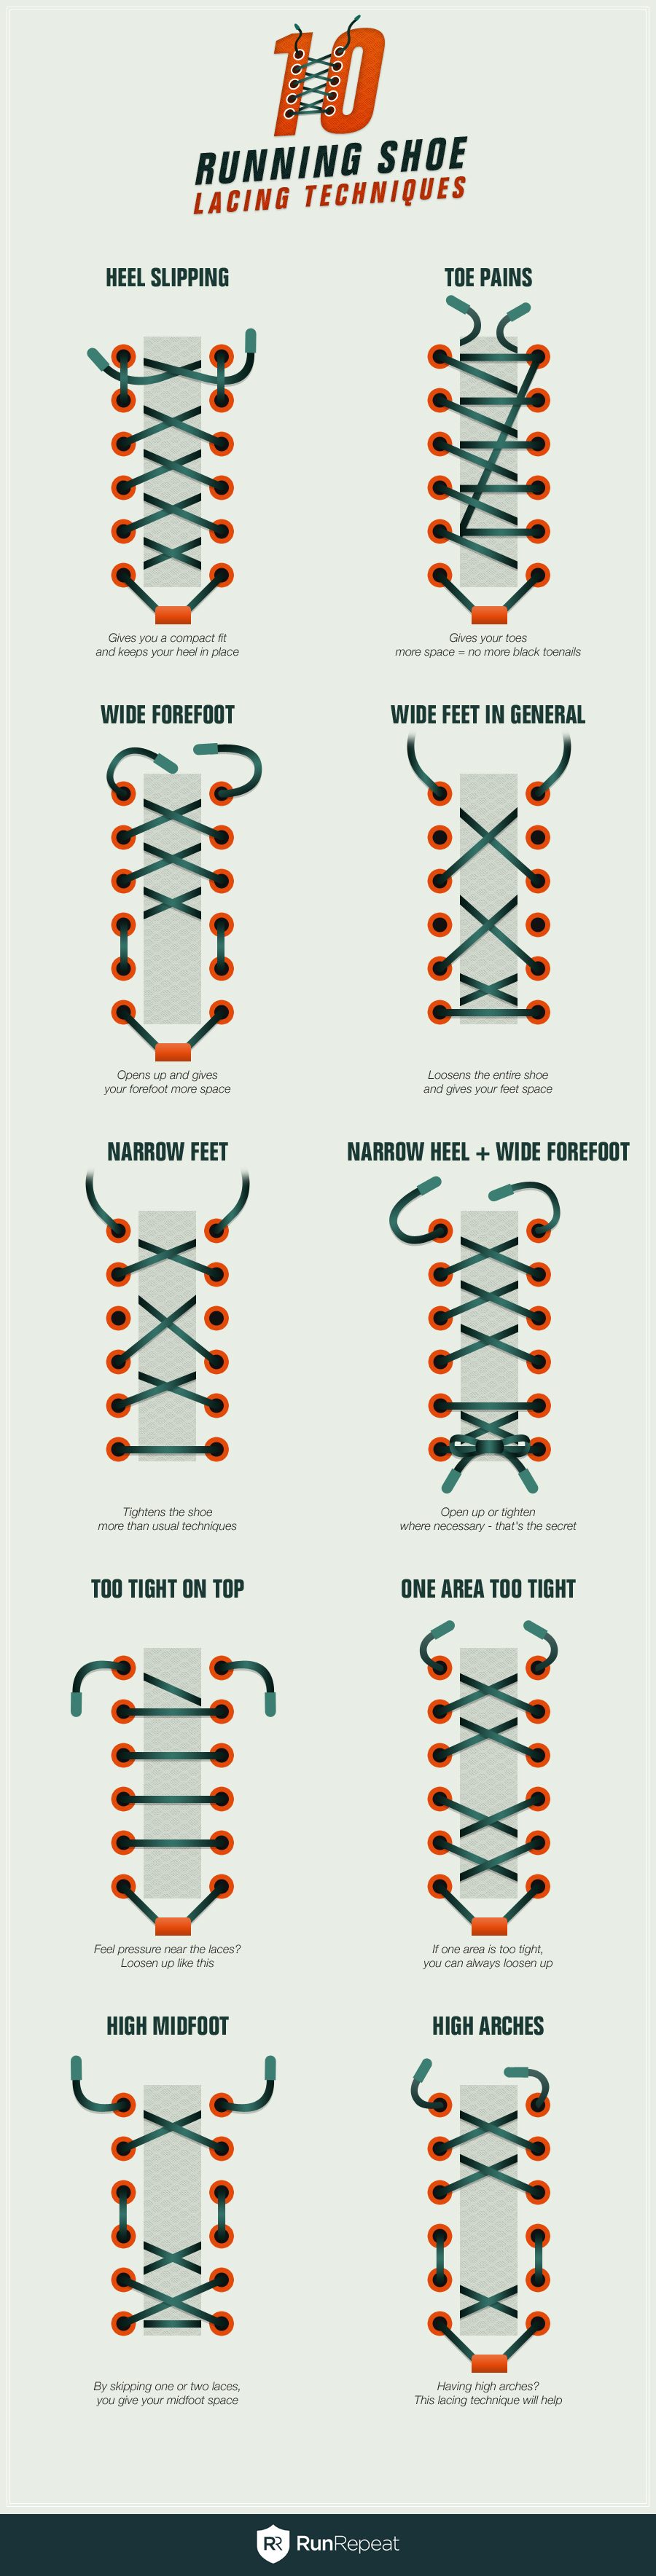 top-10-running-shoe-lacing-techniques-infographic-runrepeat